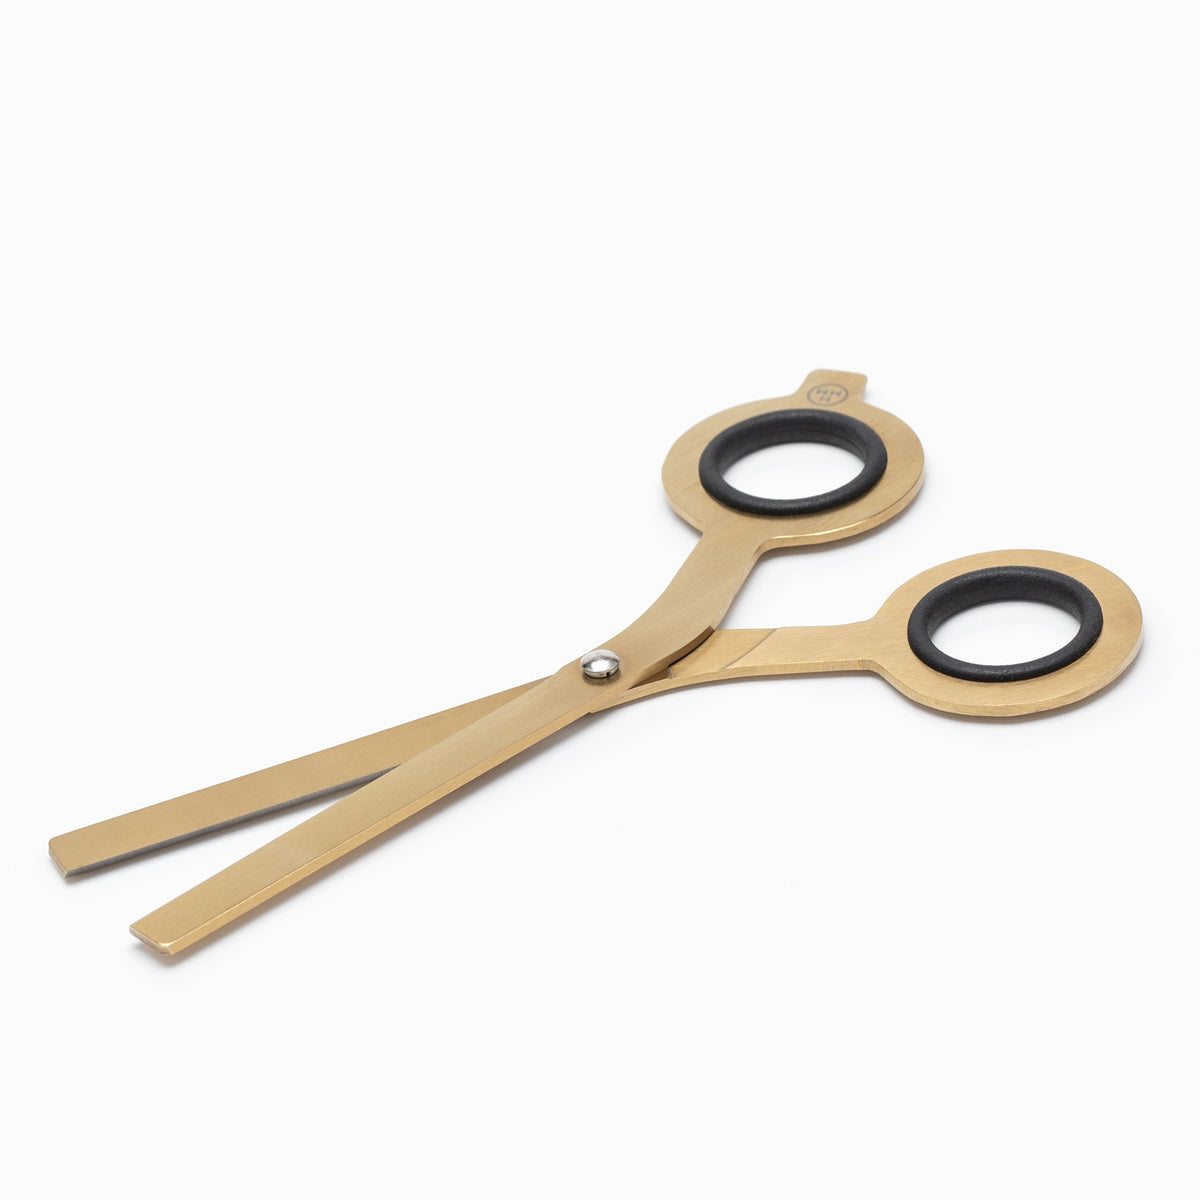 HMM Scissors: Safety Scissors for Adults